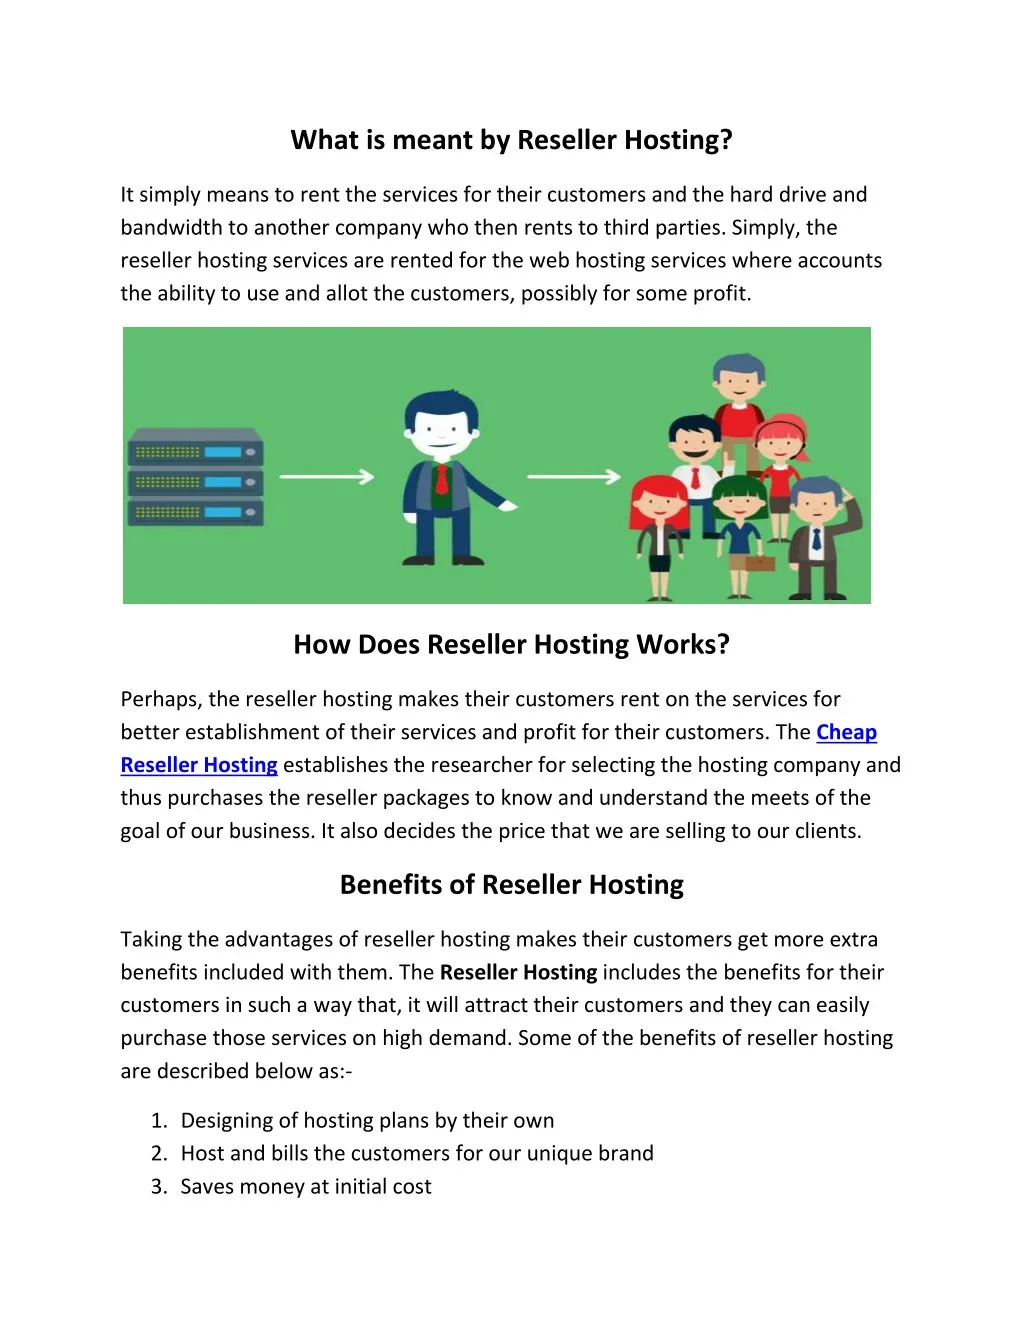 what is meant by reseller hosting